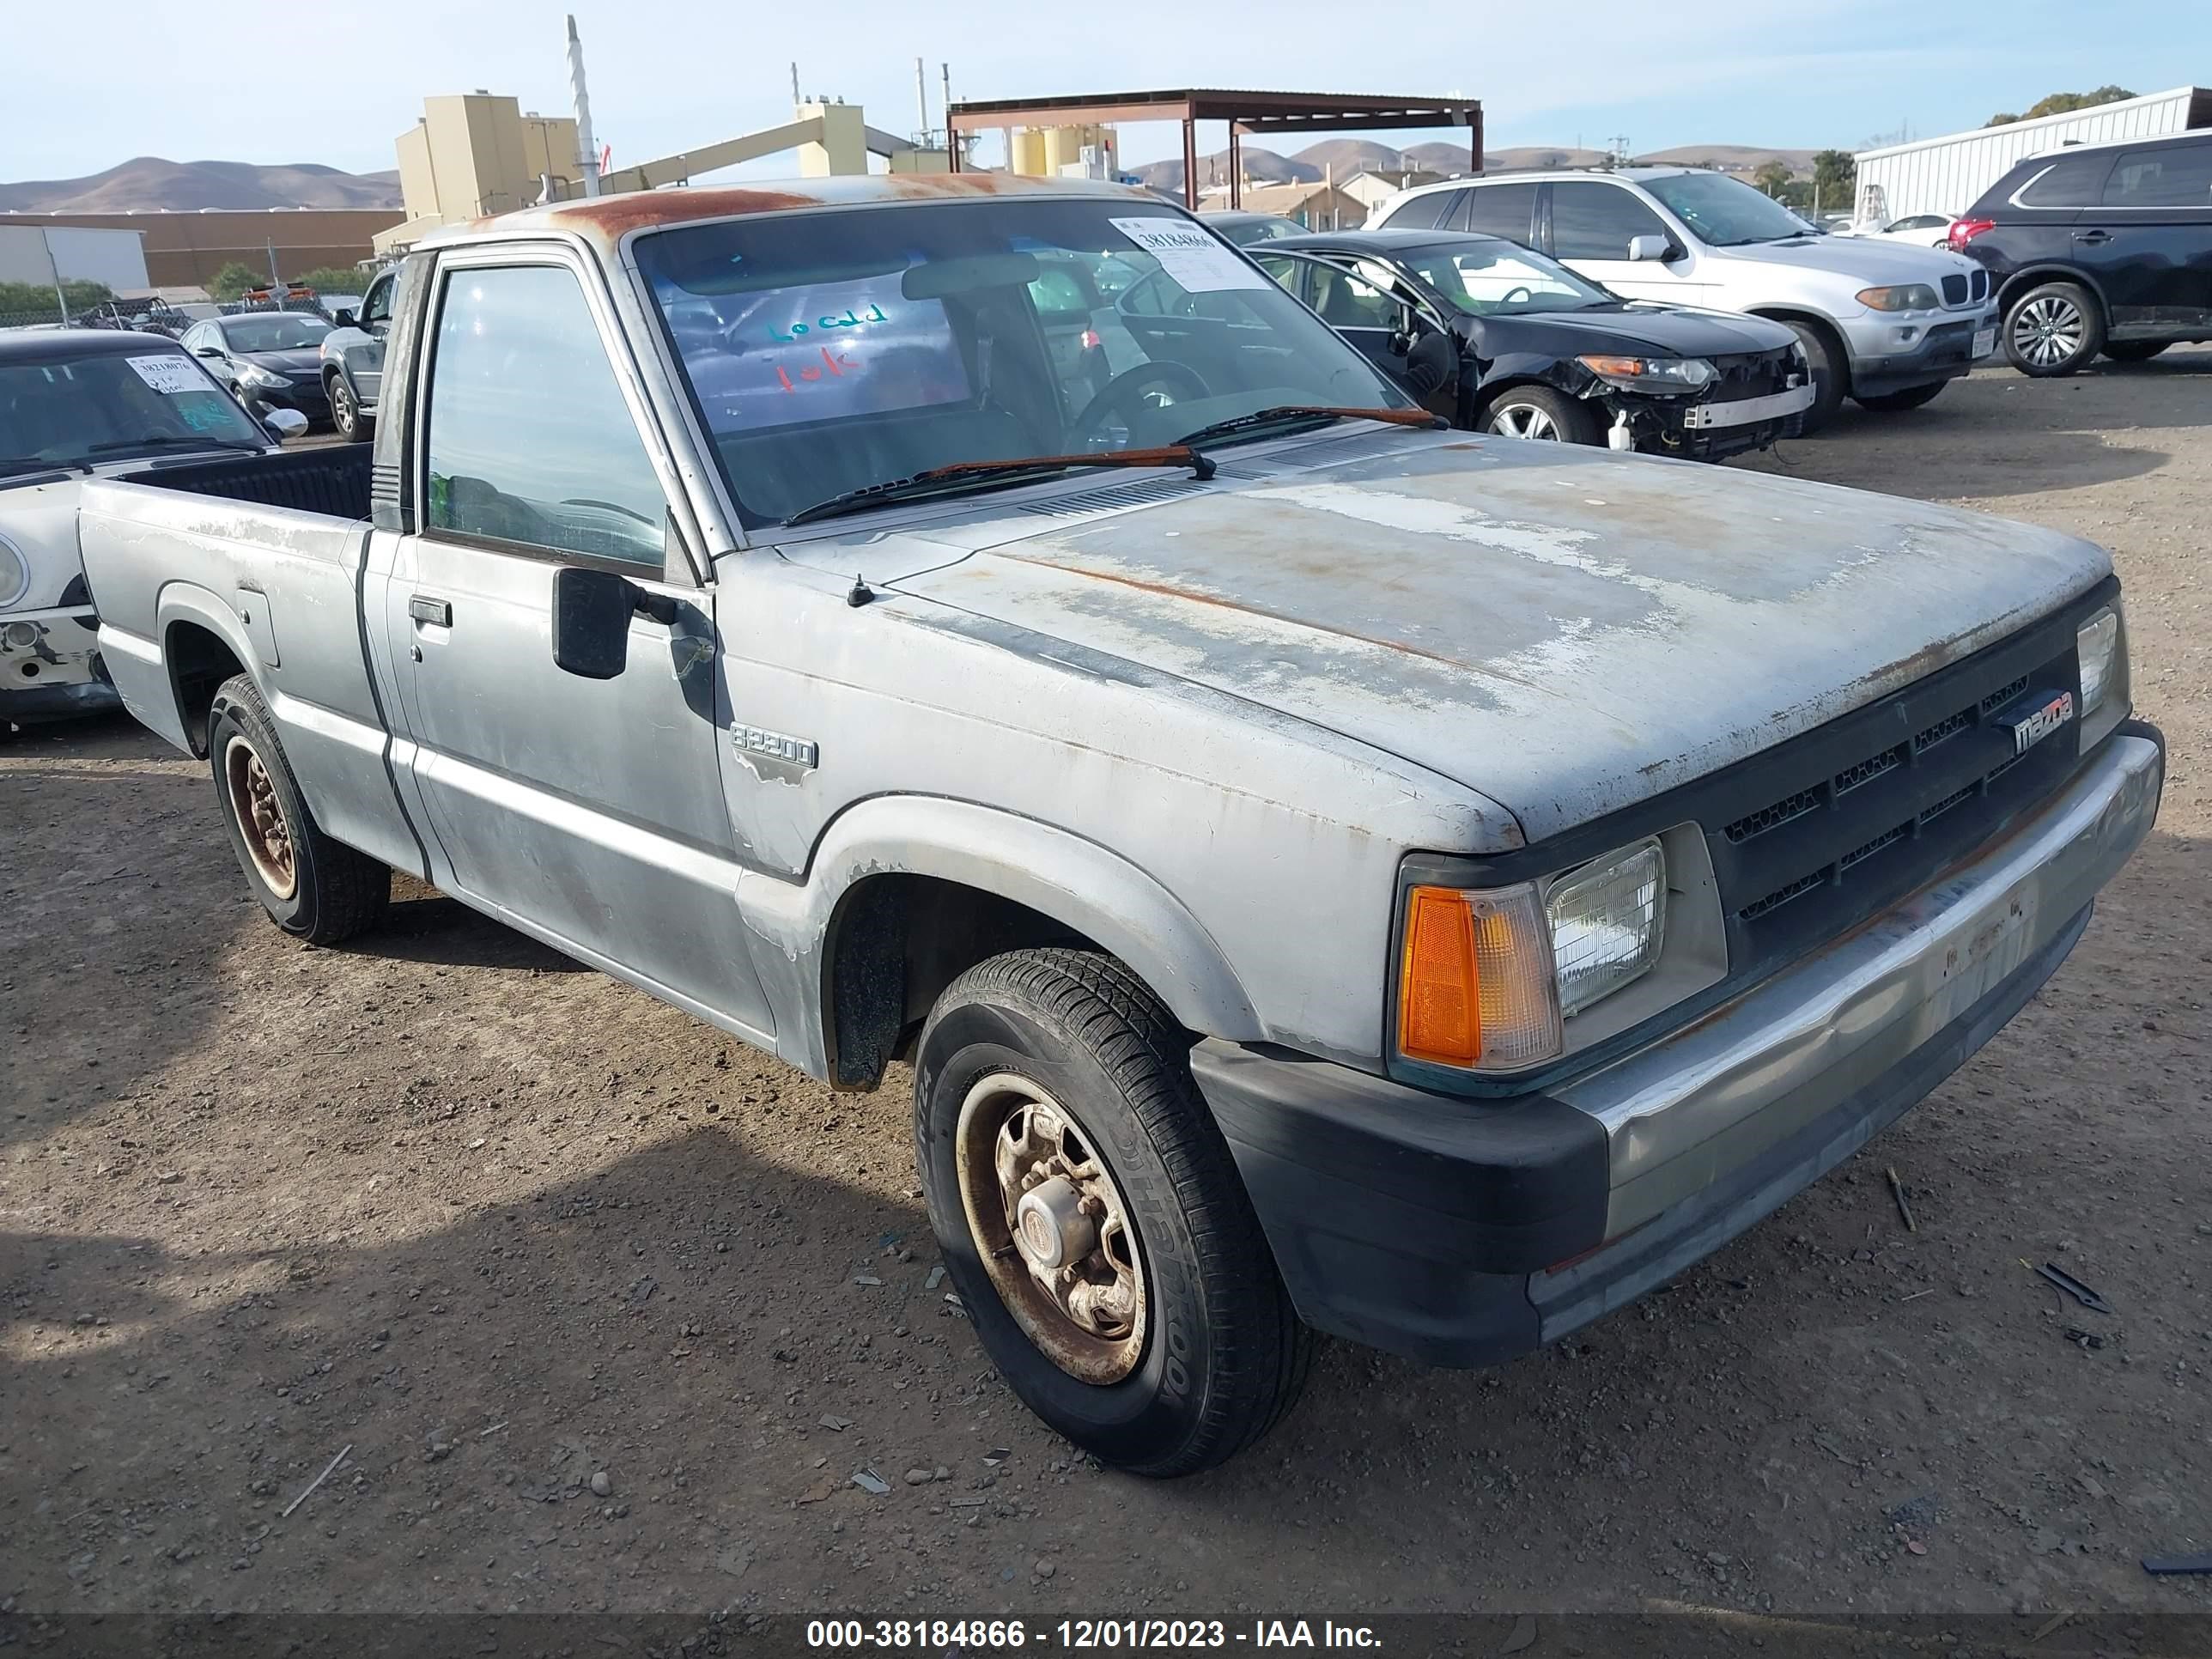 vin: JM2UF1230L0861983 JM2UF1230L0861983 1990 mazda all 2200 for Sale in 94565, 2780 Willow Pass Road, Bay Point, USA